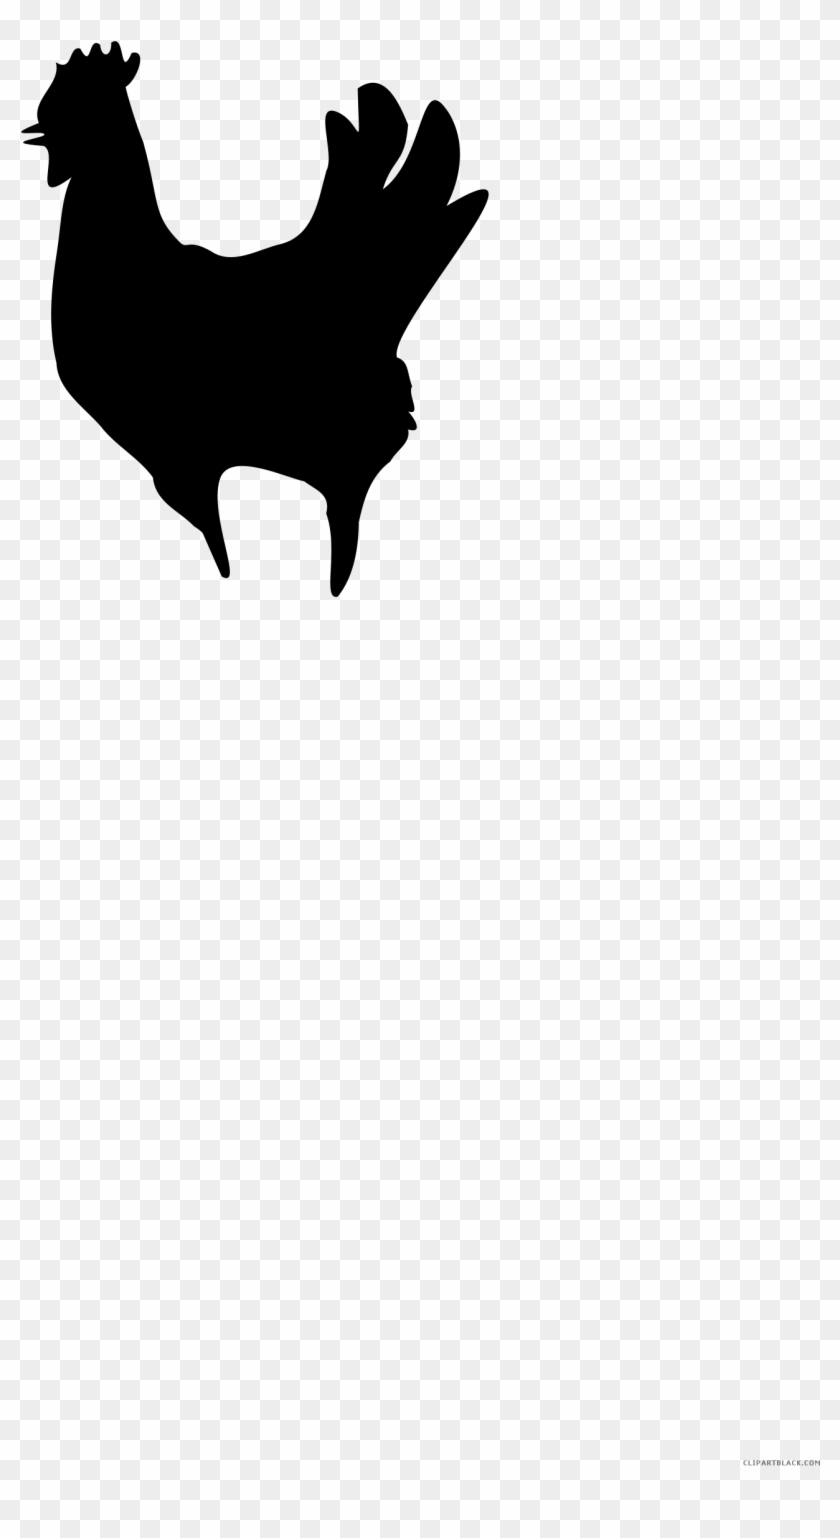 Rooster Silhouette Animal Free Black White Clipart - Silhouette #587102